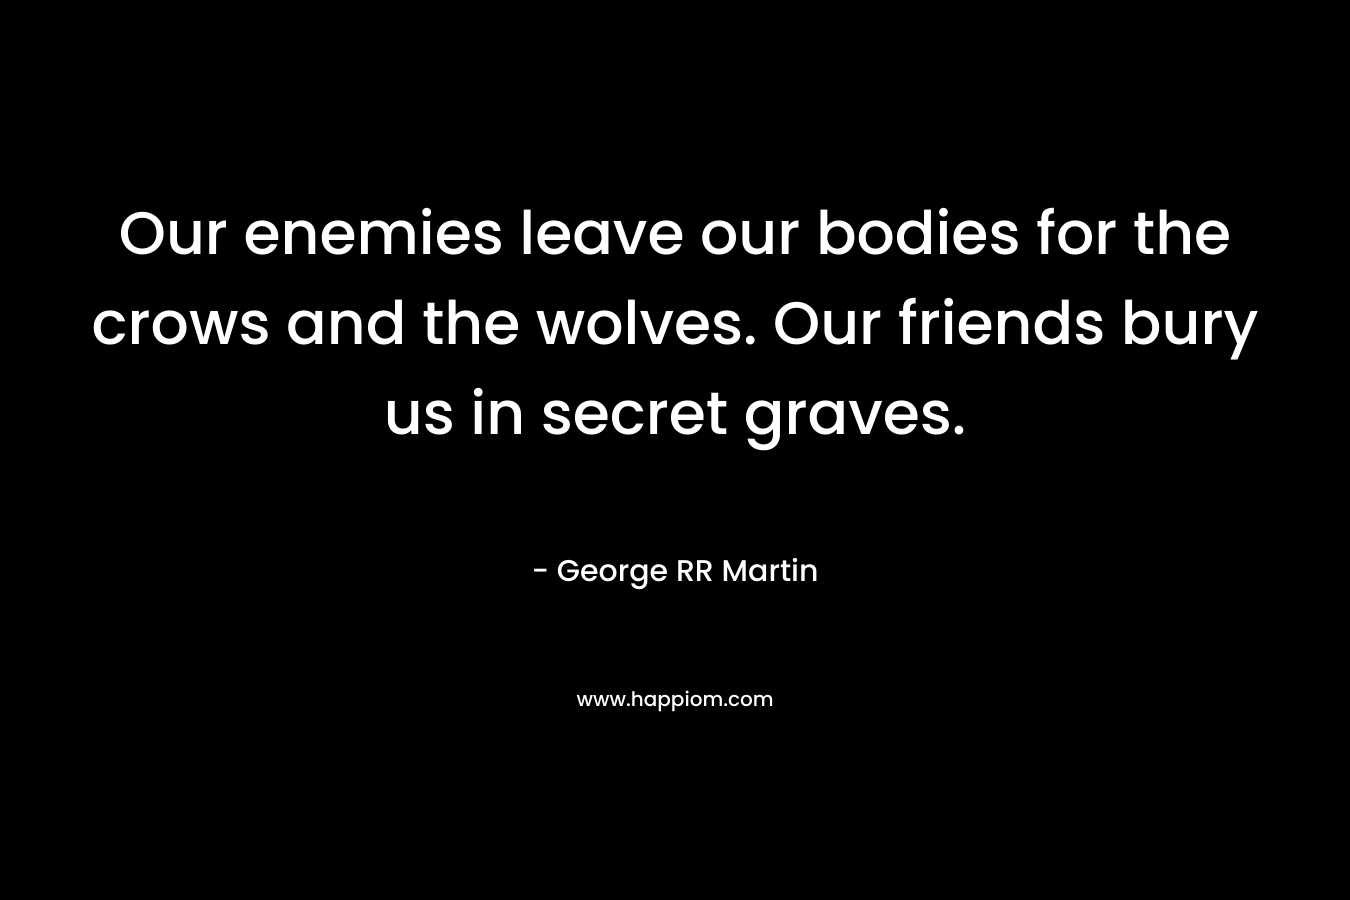 Our enemies leave our bodies for the crows and the wolves. Our friends bury us in secret graves.